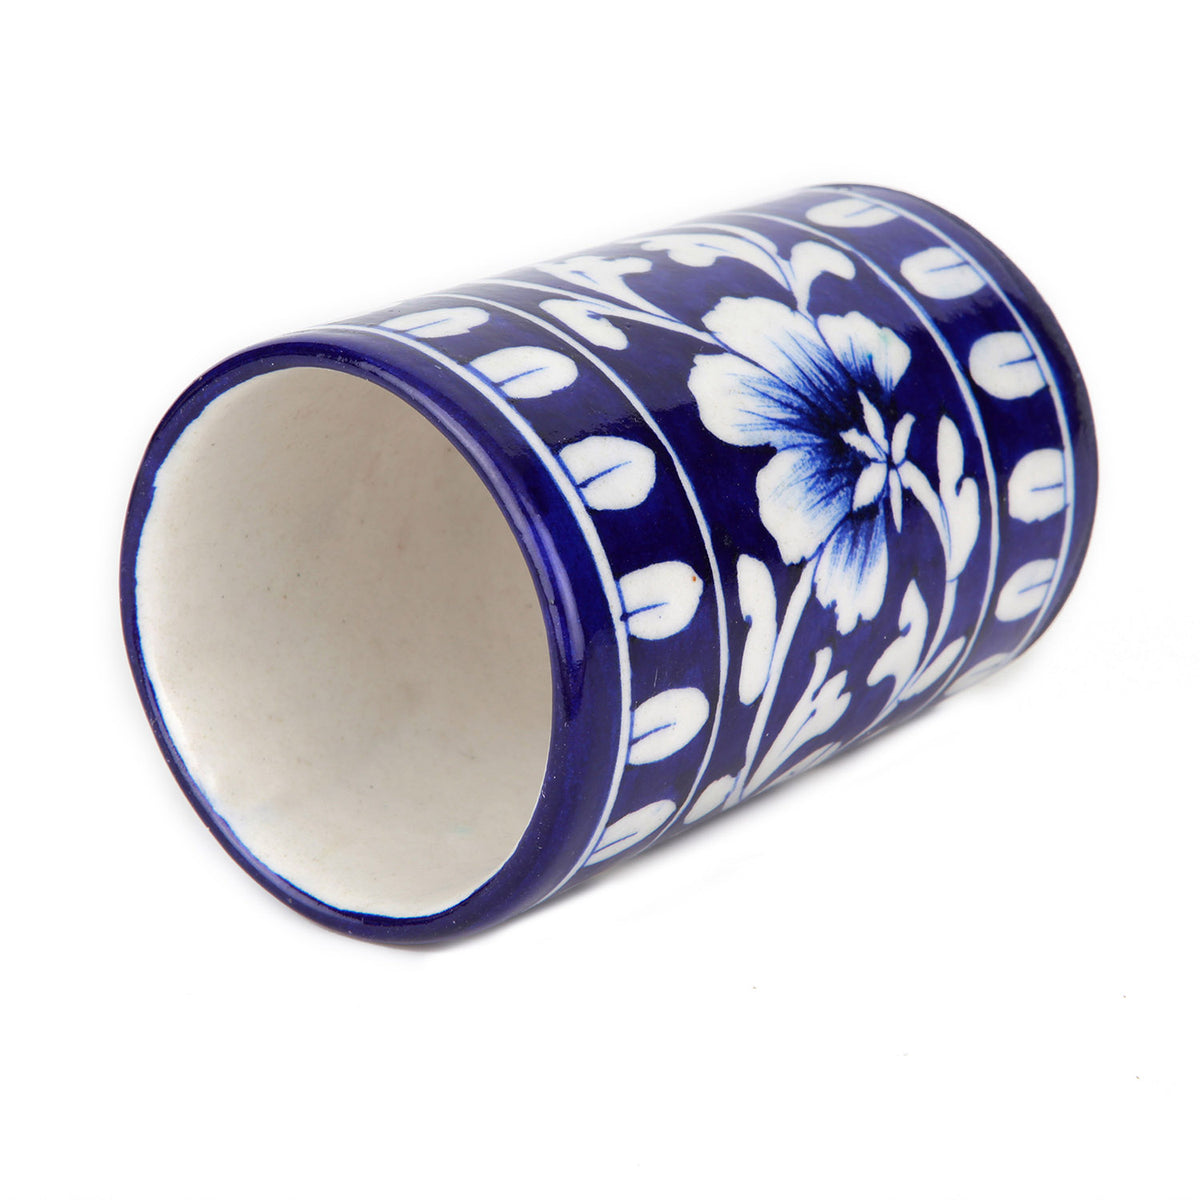 Blue Pottery Hand Painted Floral Motif Utility Holder | Home / Office Organisers